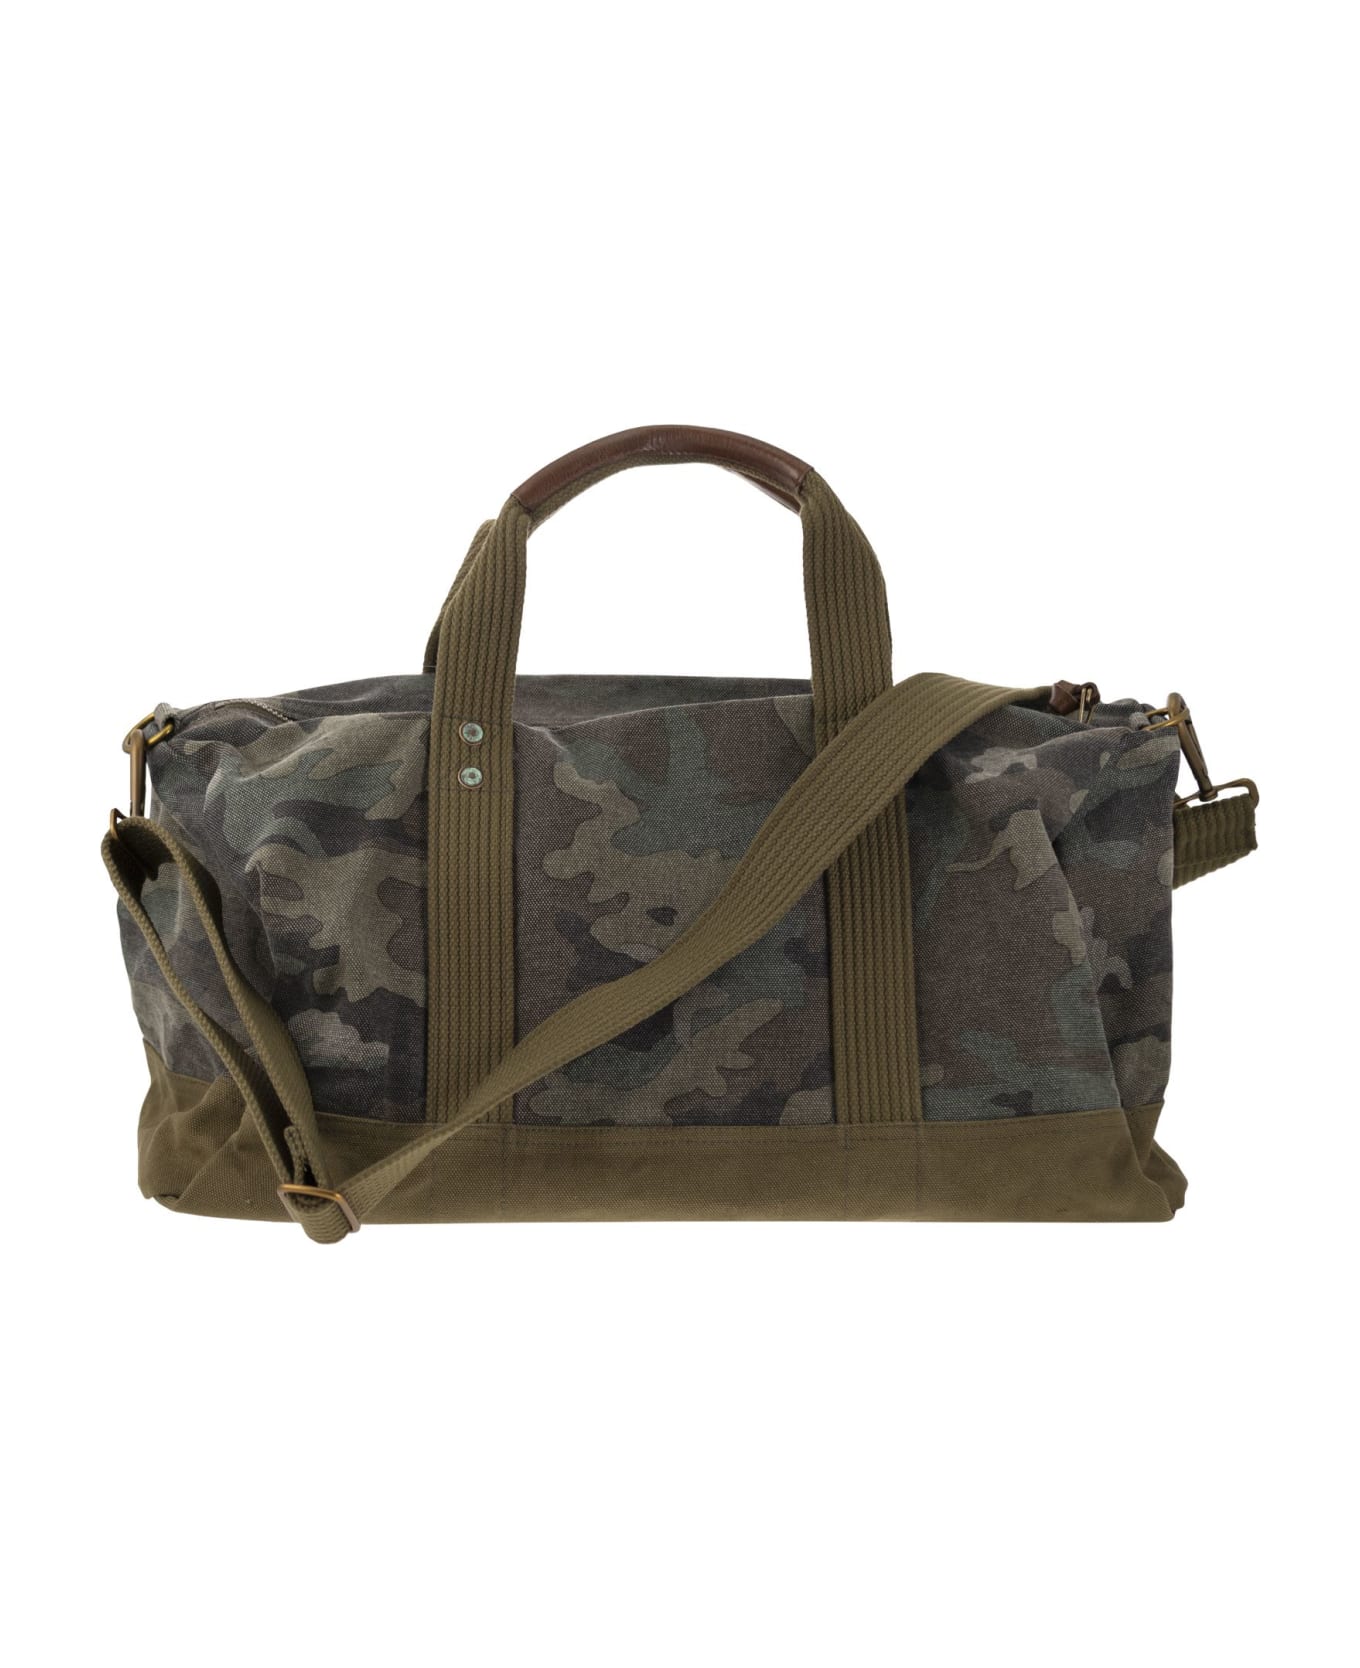 Polo Ralph Lauren Camouflage Canvas Duffle Bag With Tiger - Camo トラベルバッグ